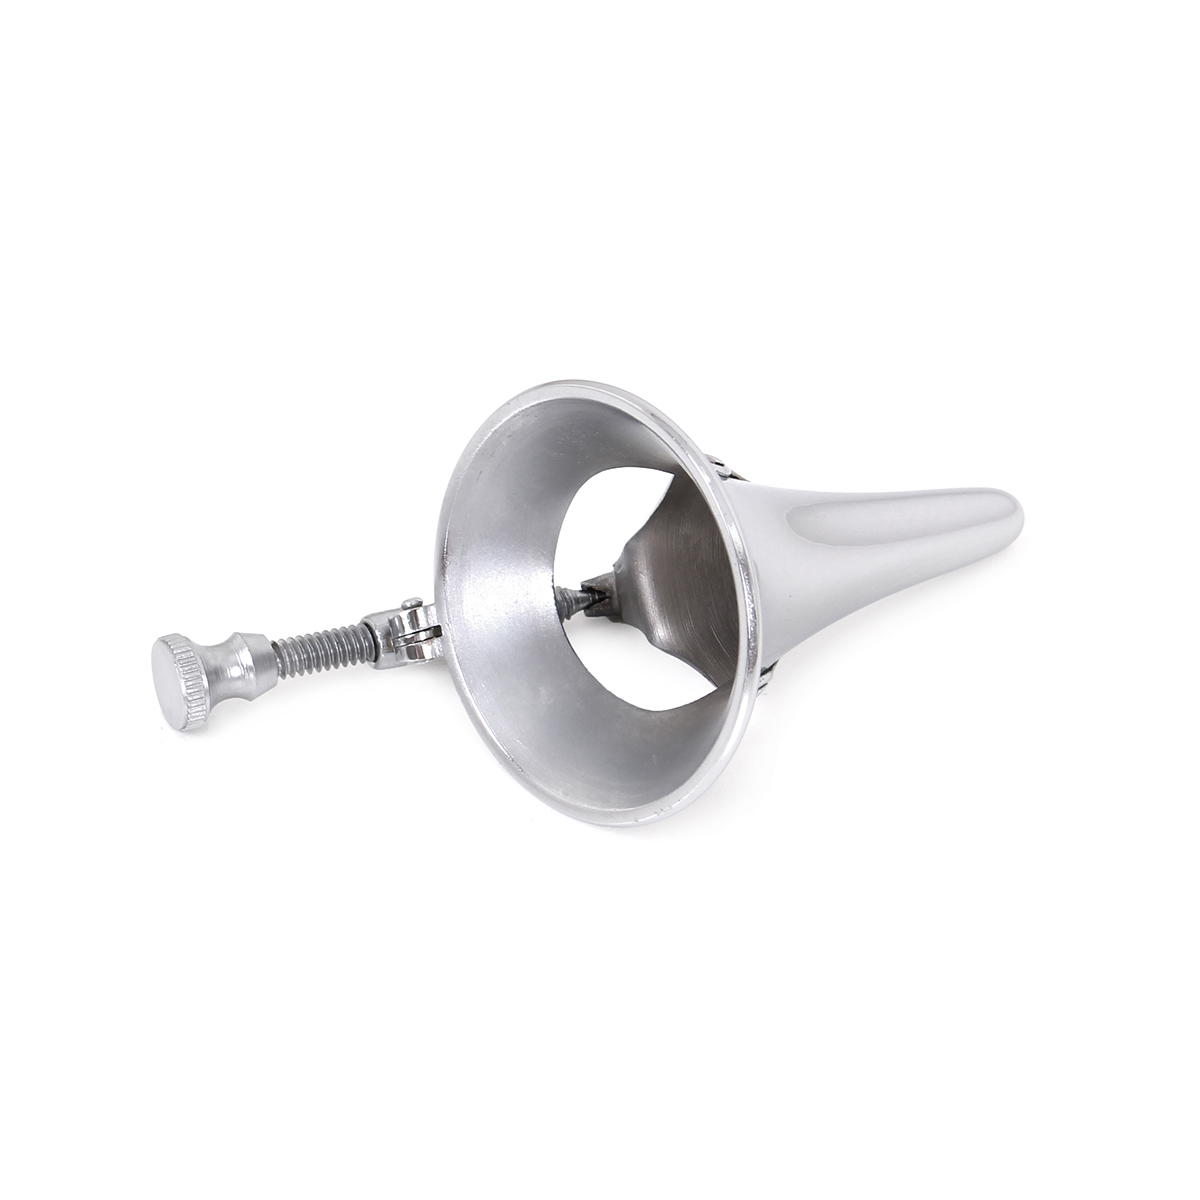 Collin-Small-Anal-Speculum-OPR-2960090-5